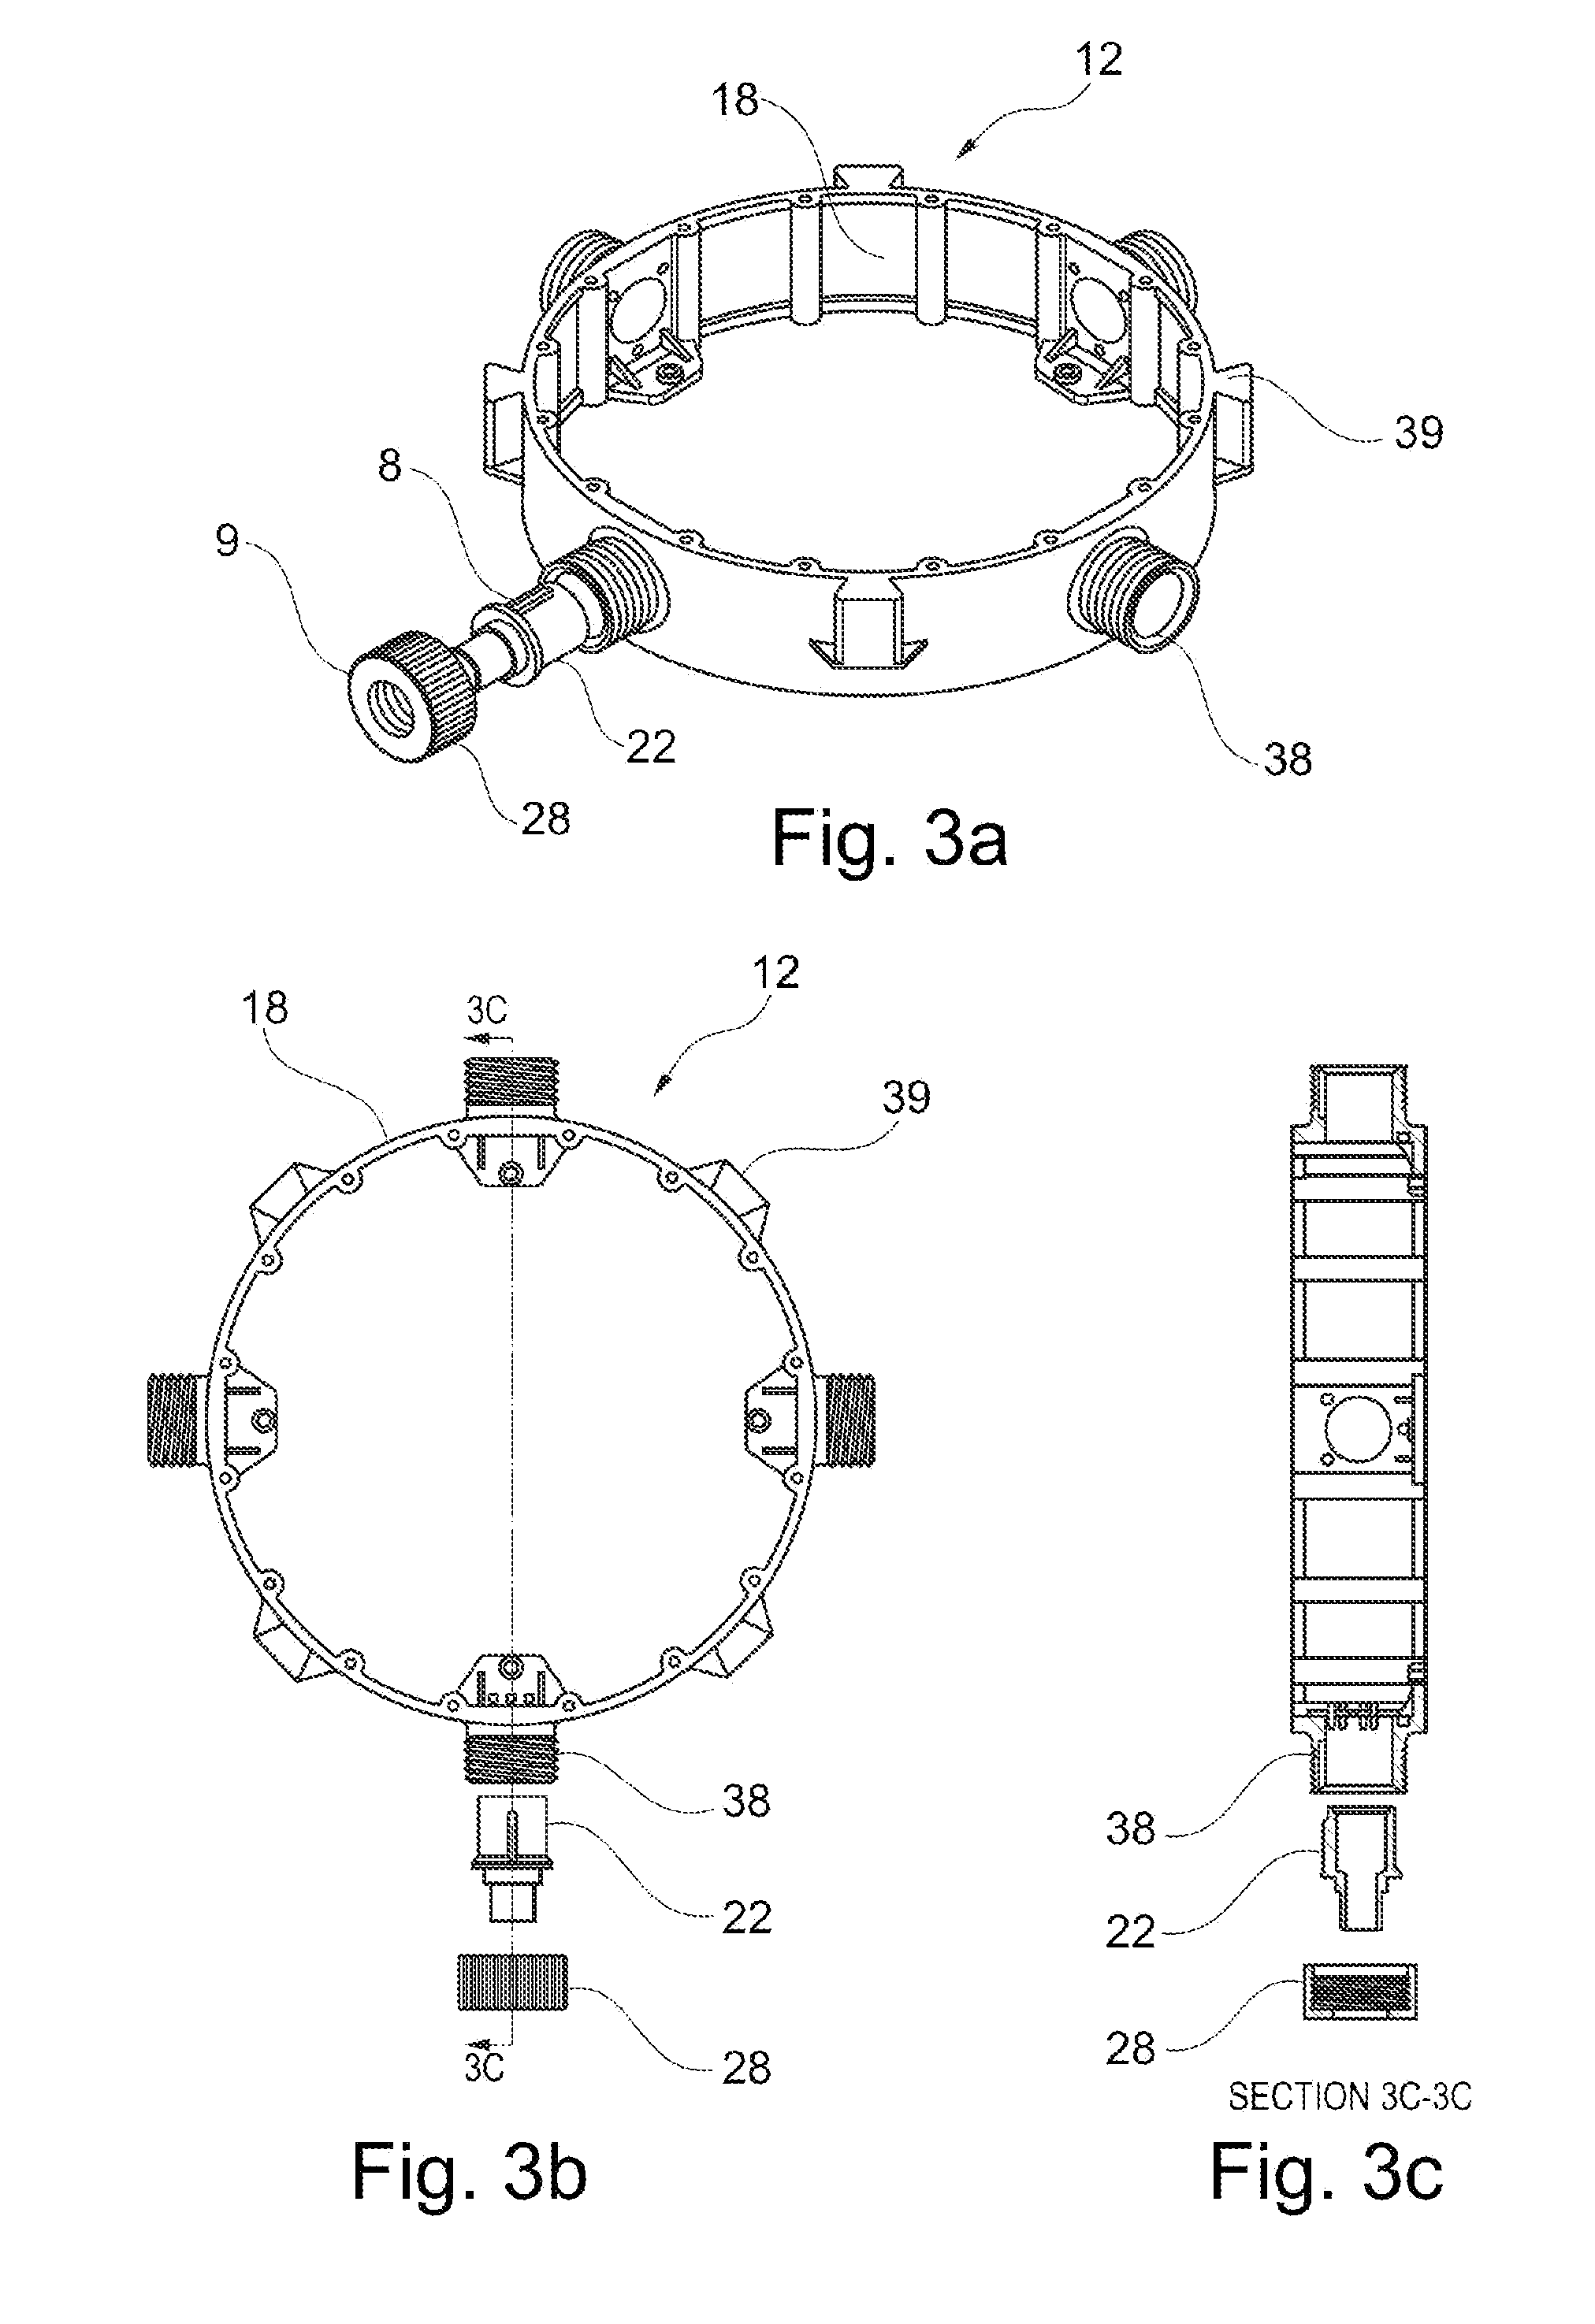 Hovering aerial vehicle with removable rotor arm assemblies